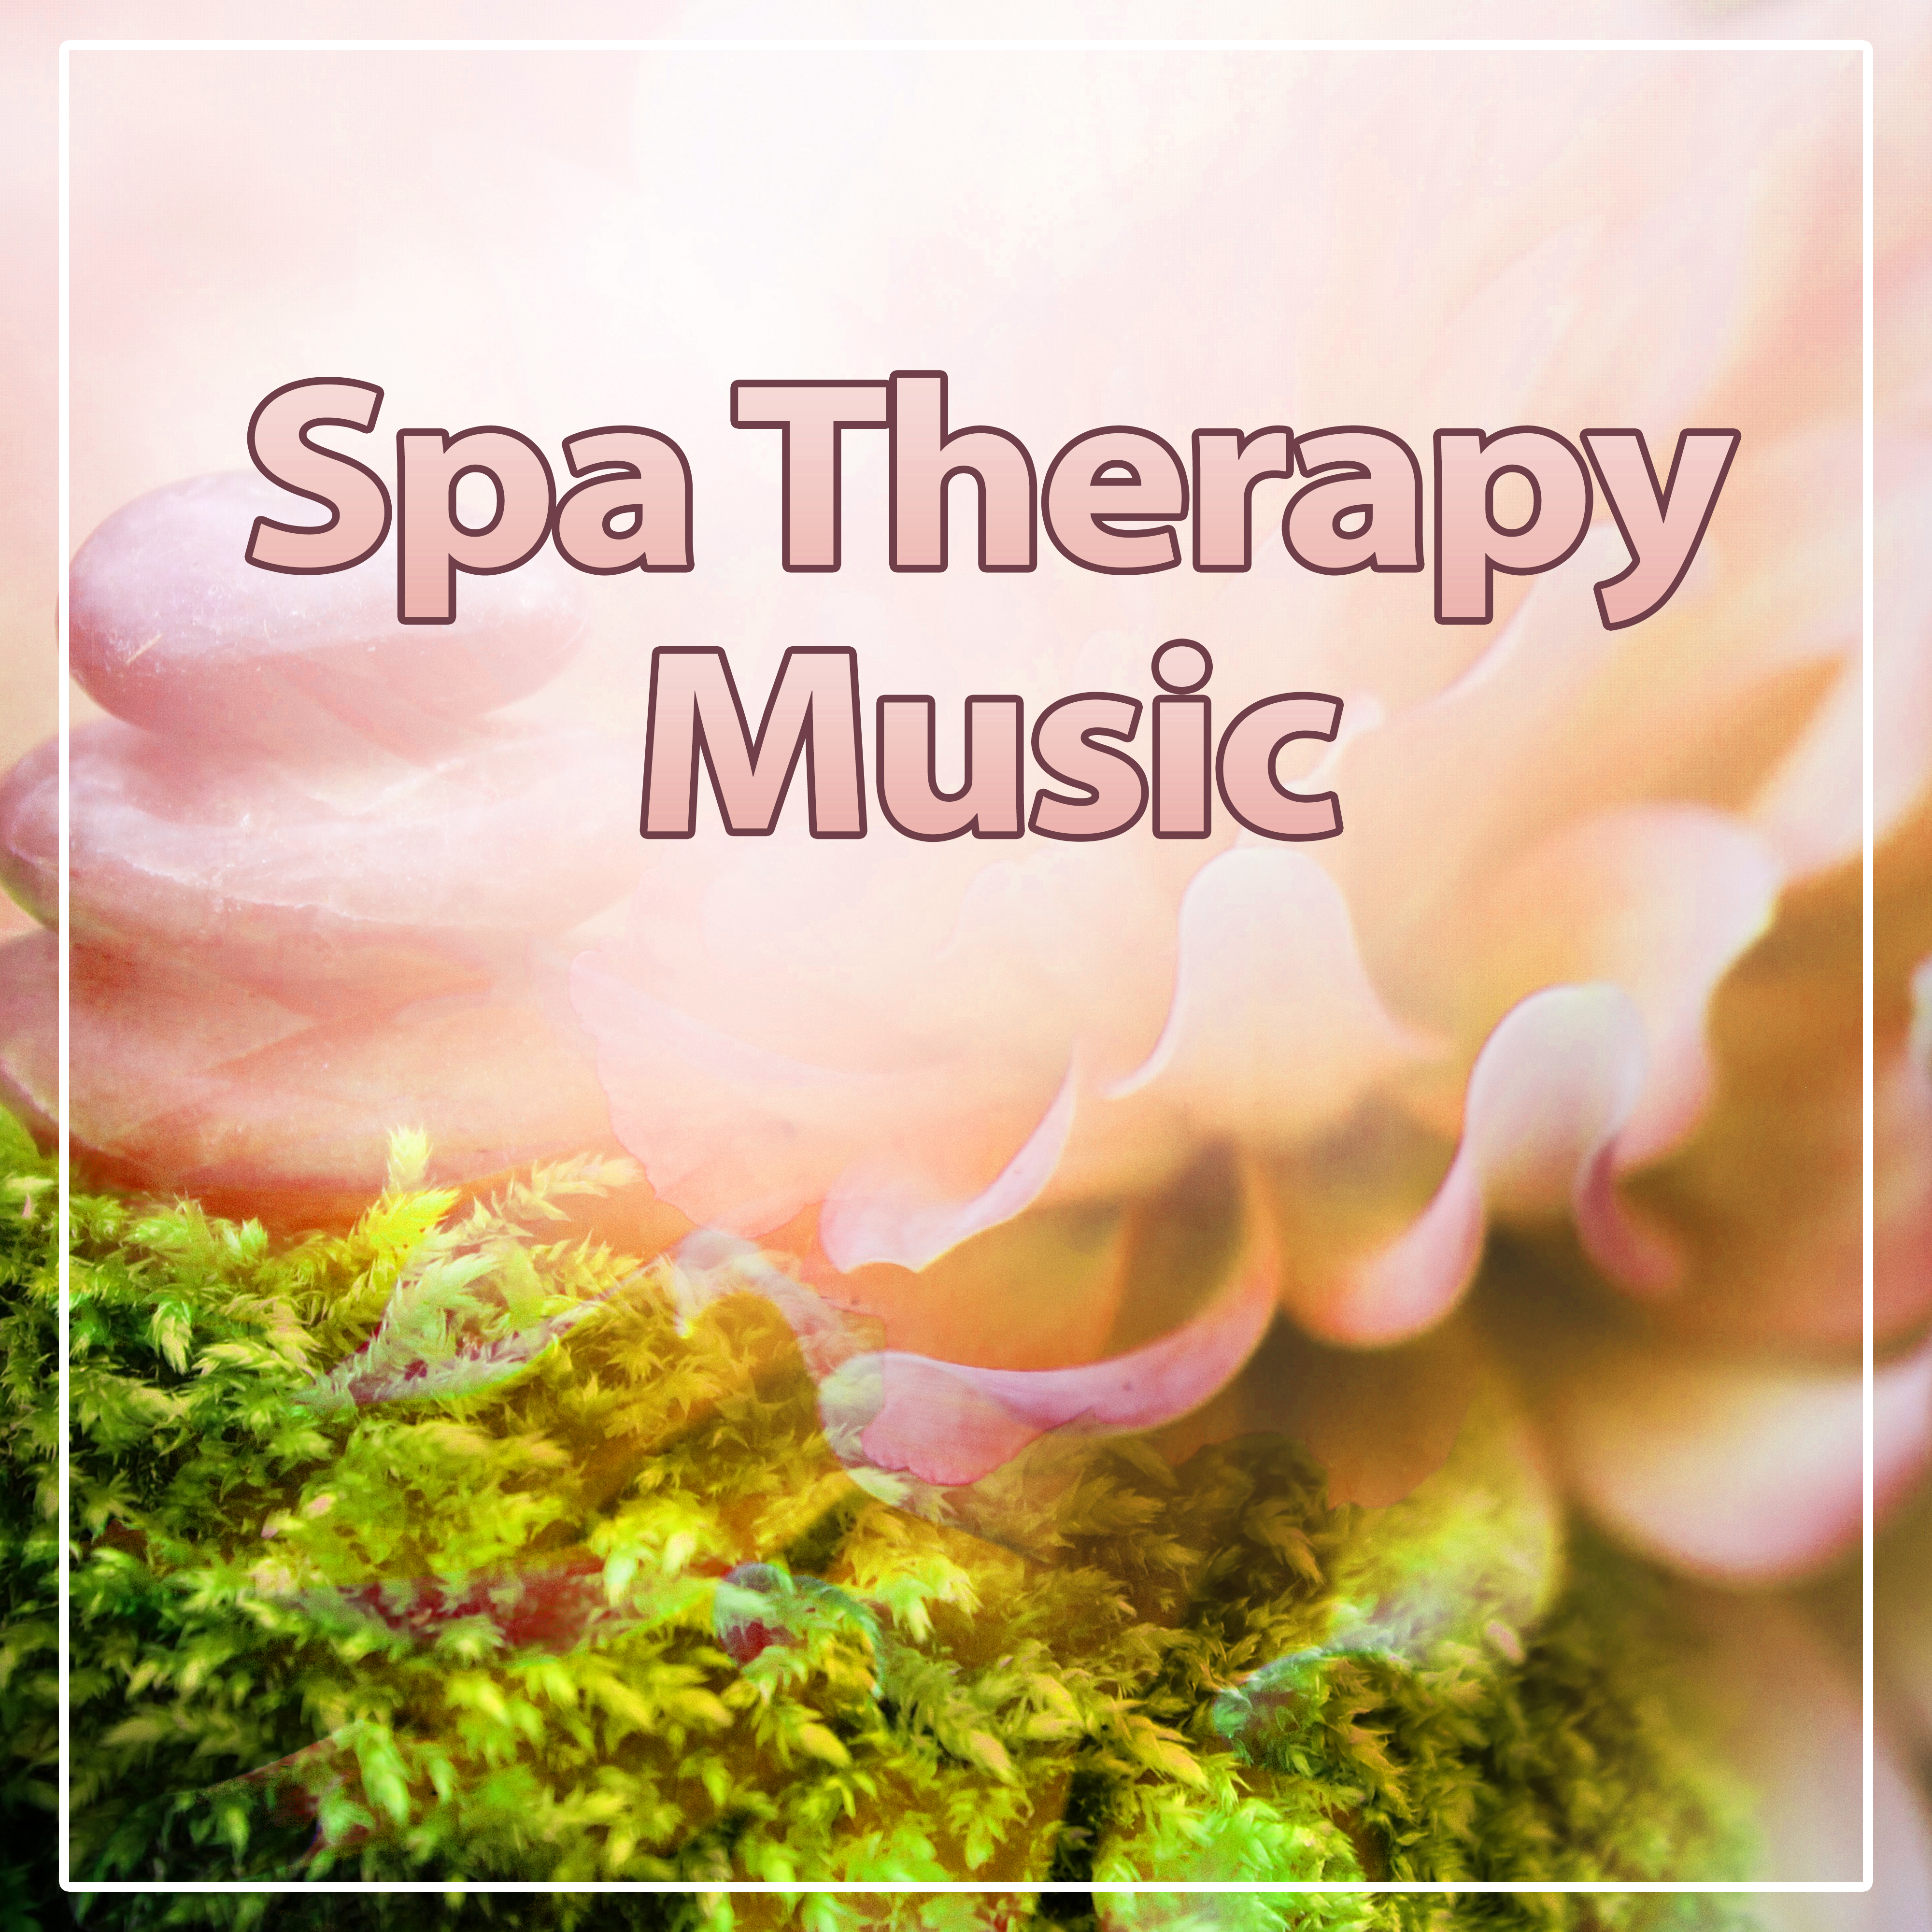 Spa Therapy Music  Nature Sounds, Spa Massage, Gentle Music, Silk Touch, Peaceful Music, Relax